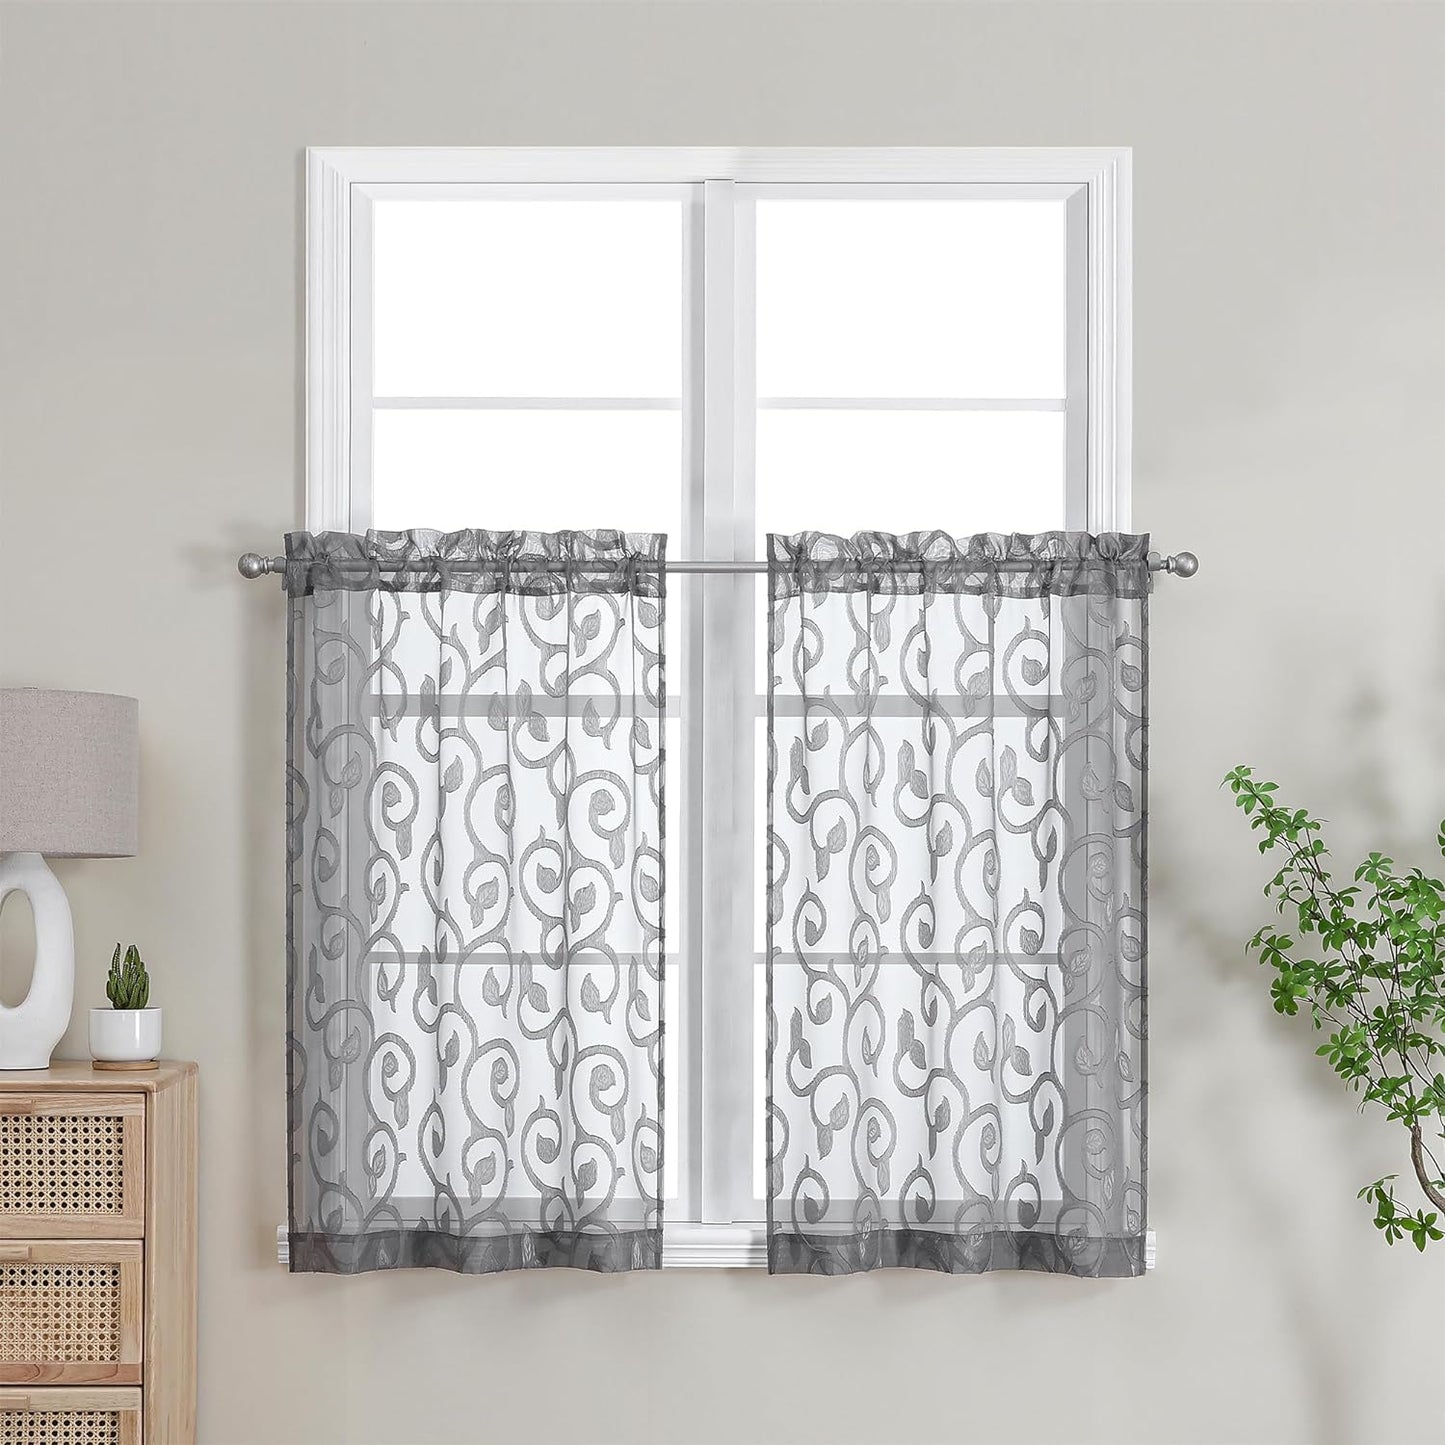 OWENIE Furman Sheer Curtains 84 Inches Long for Bedroom Living Room 2 Panels Set, Light Filtering Window Curtains, Semi Transparent Voile Top Dual Rod Pocket, Grey, 40Wx84L Inch, Total 84 Inches Width  OWENIE Charcoal Gray 26W X 36L 